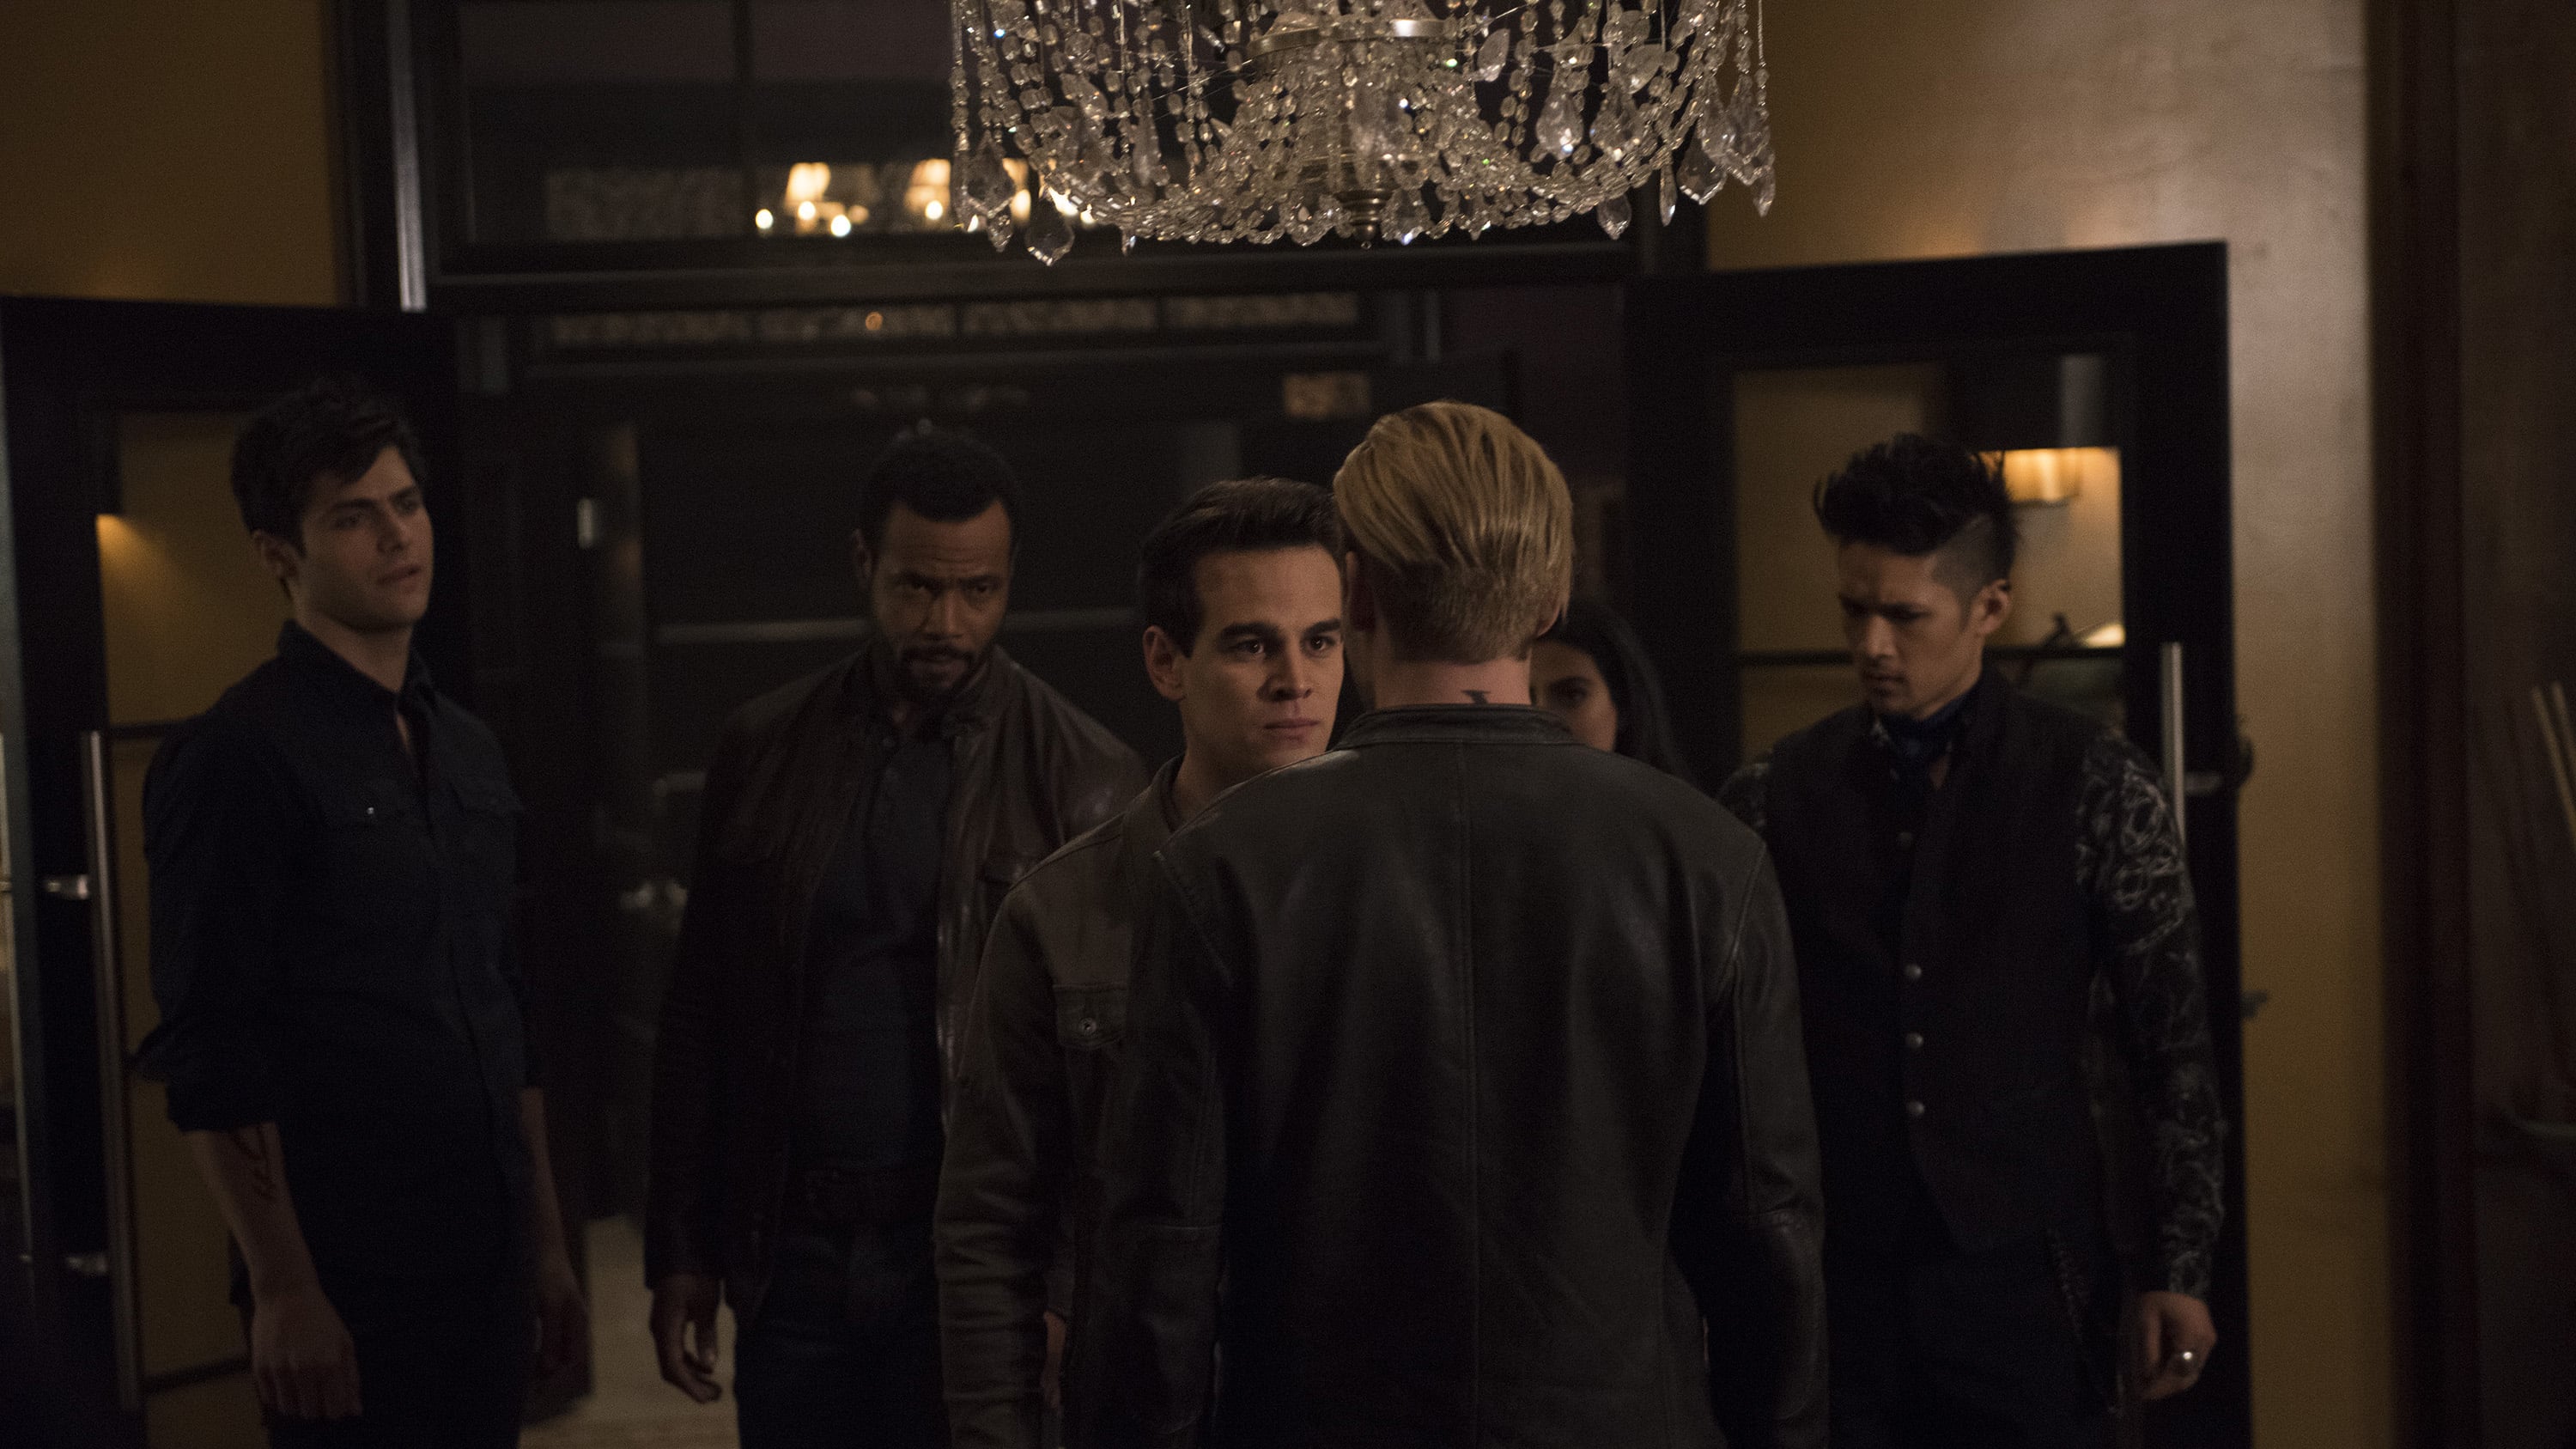 Shadowhunters 3×08: “A Heart of Darkness”